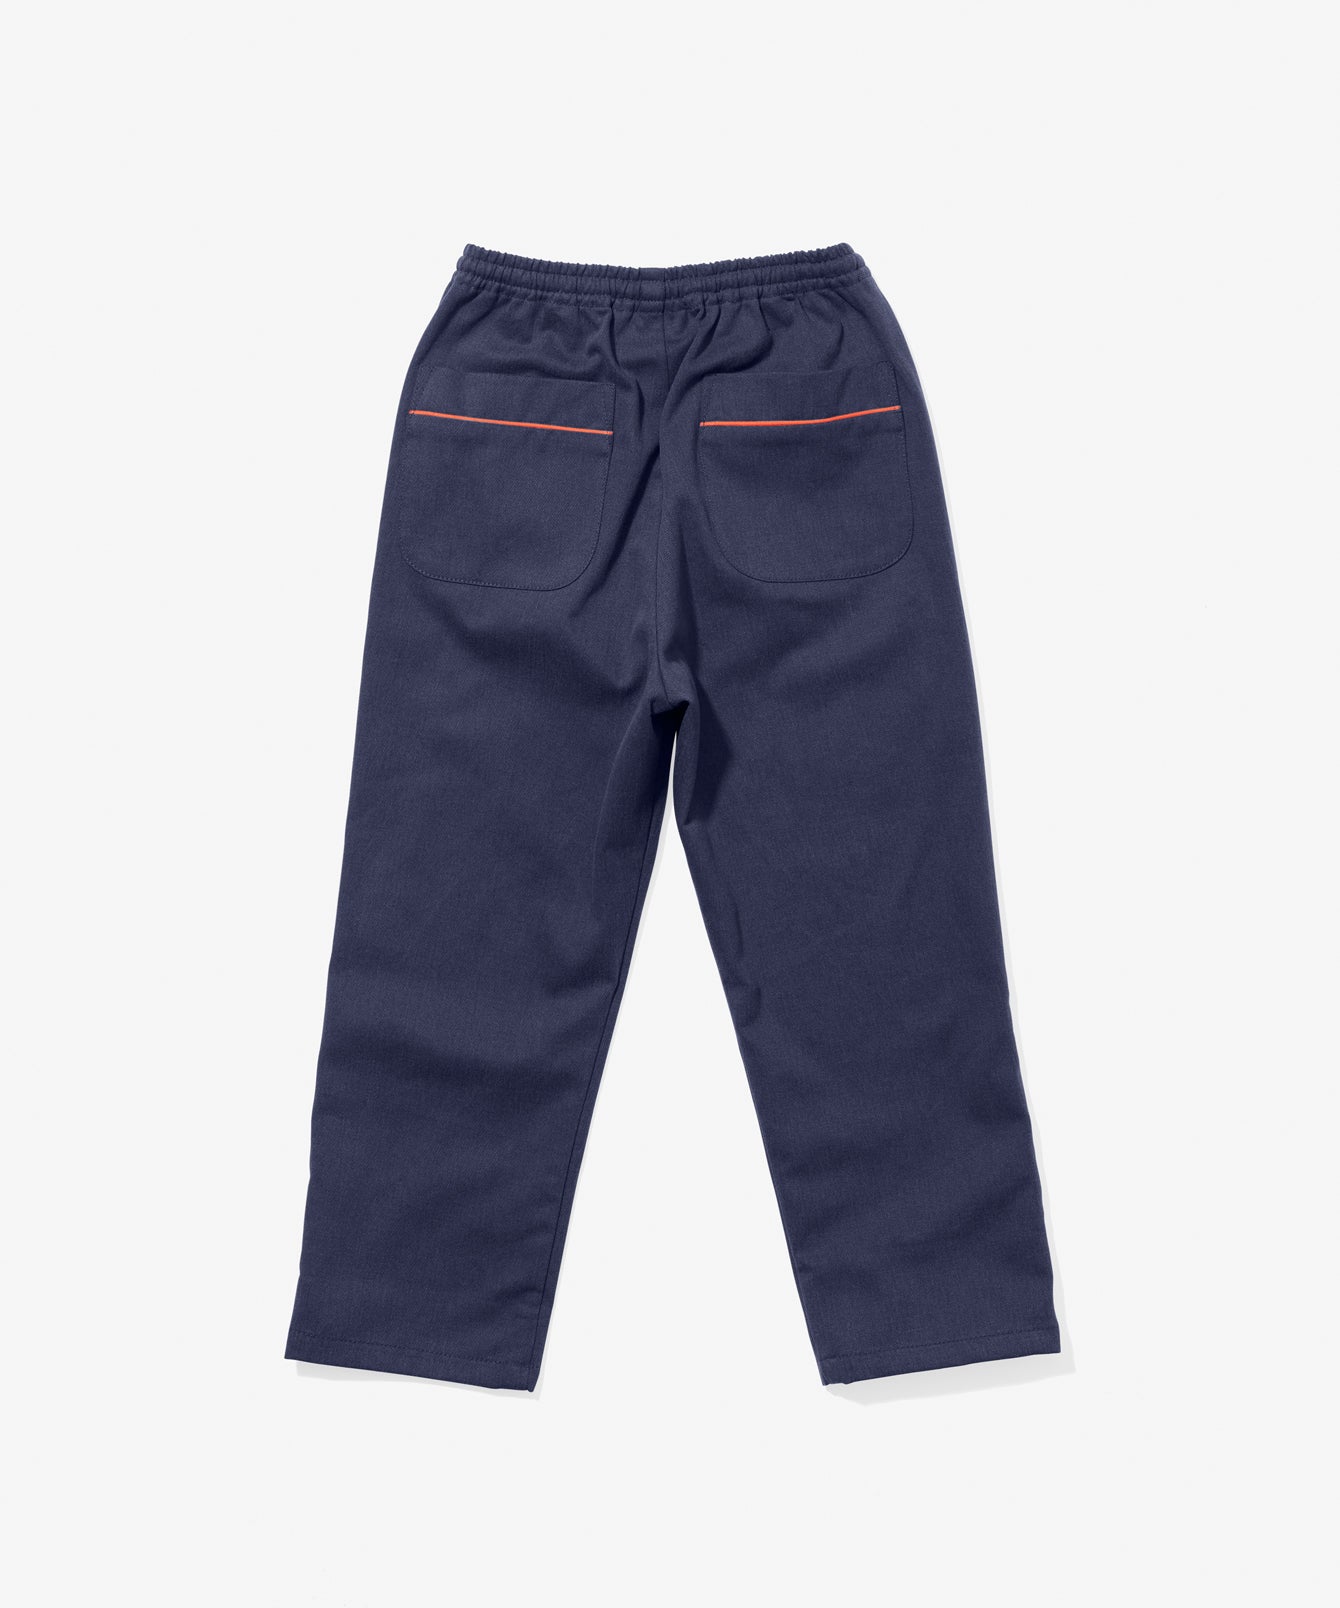 Oso & Me Bowie Pant Navy